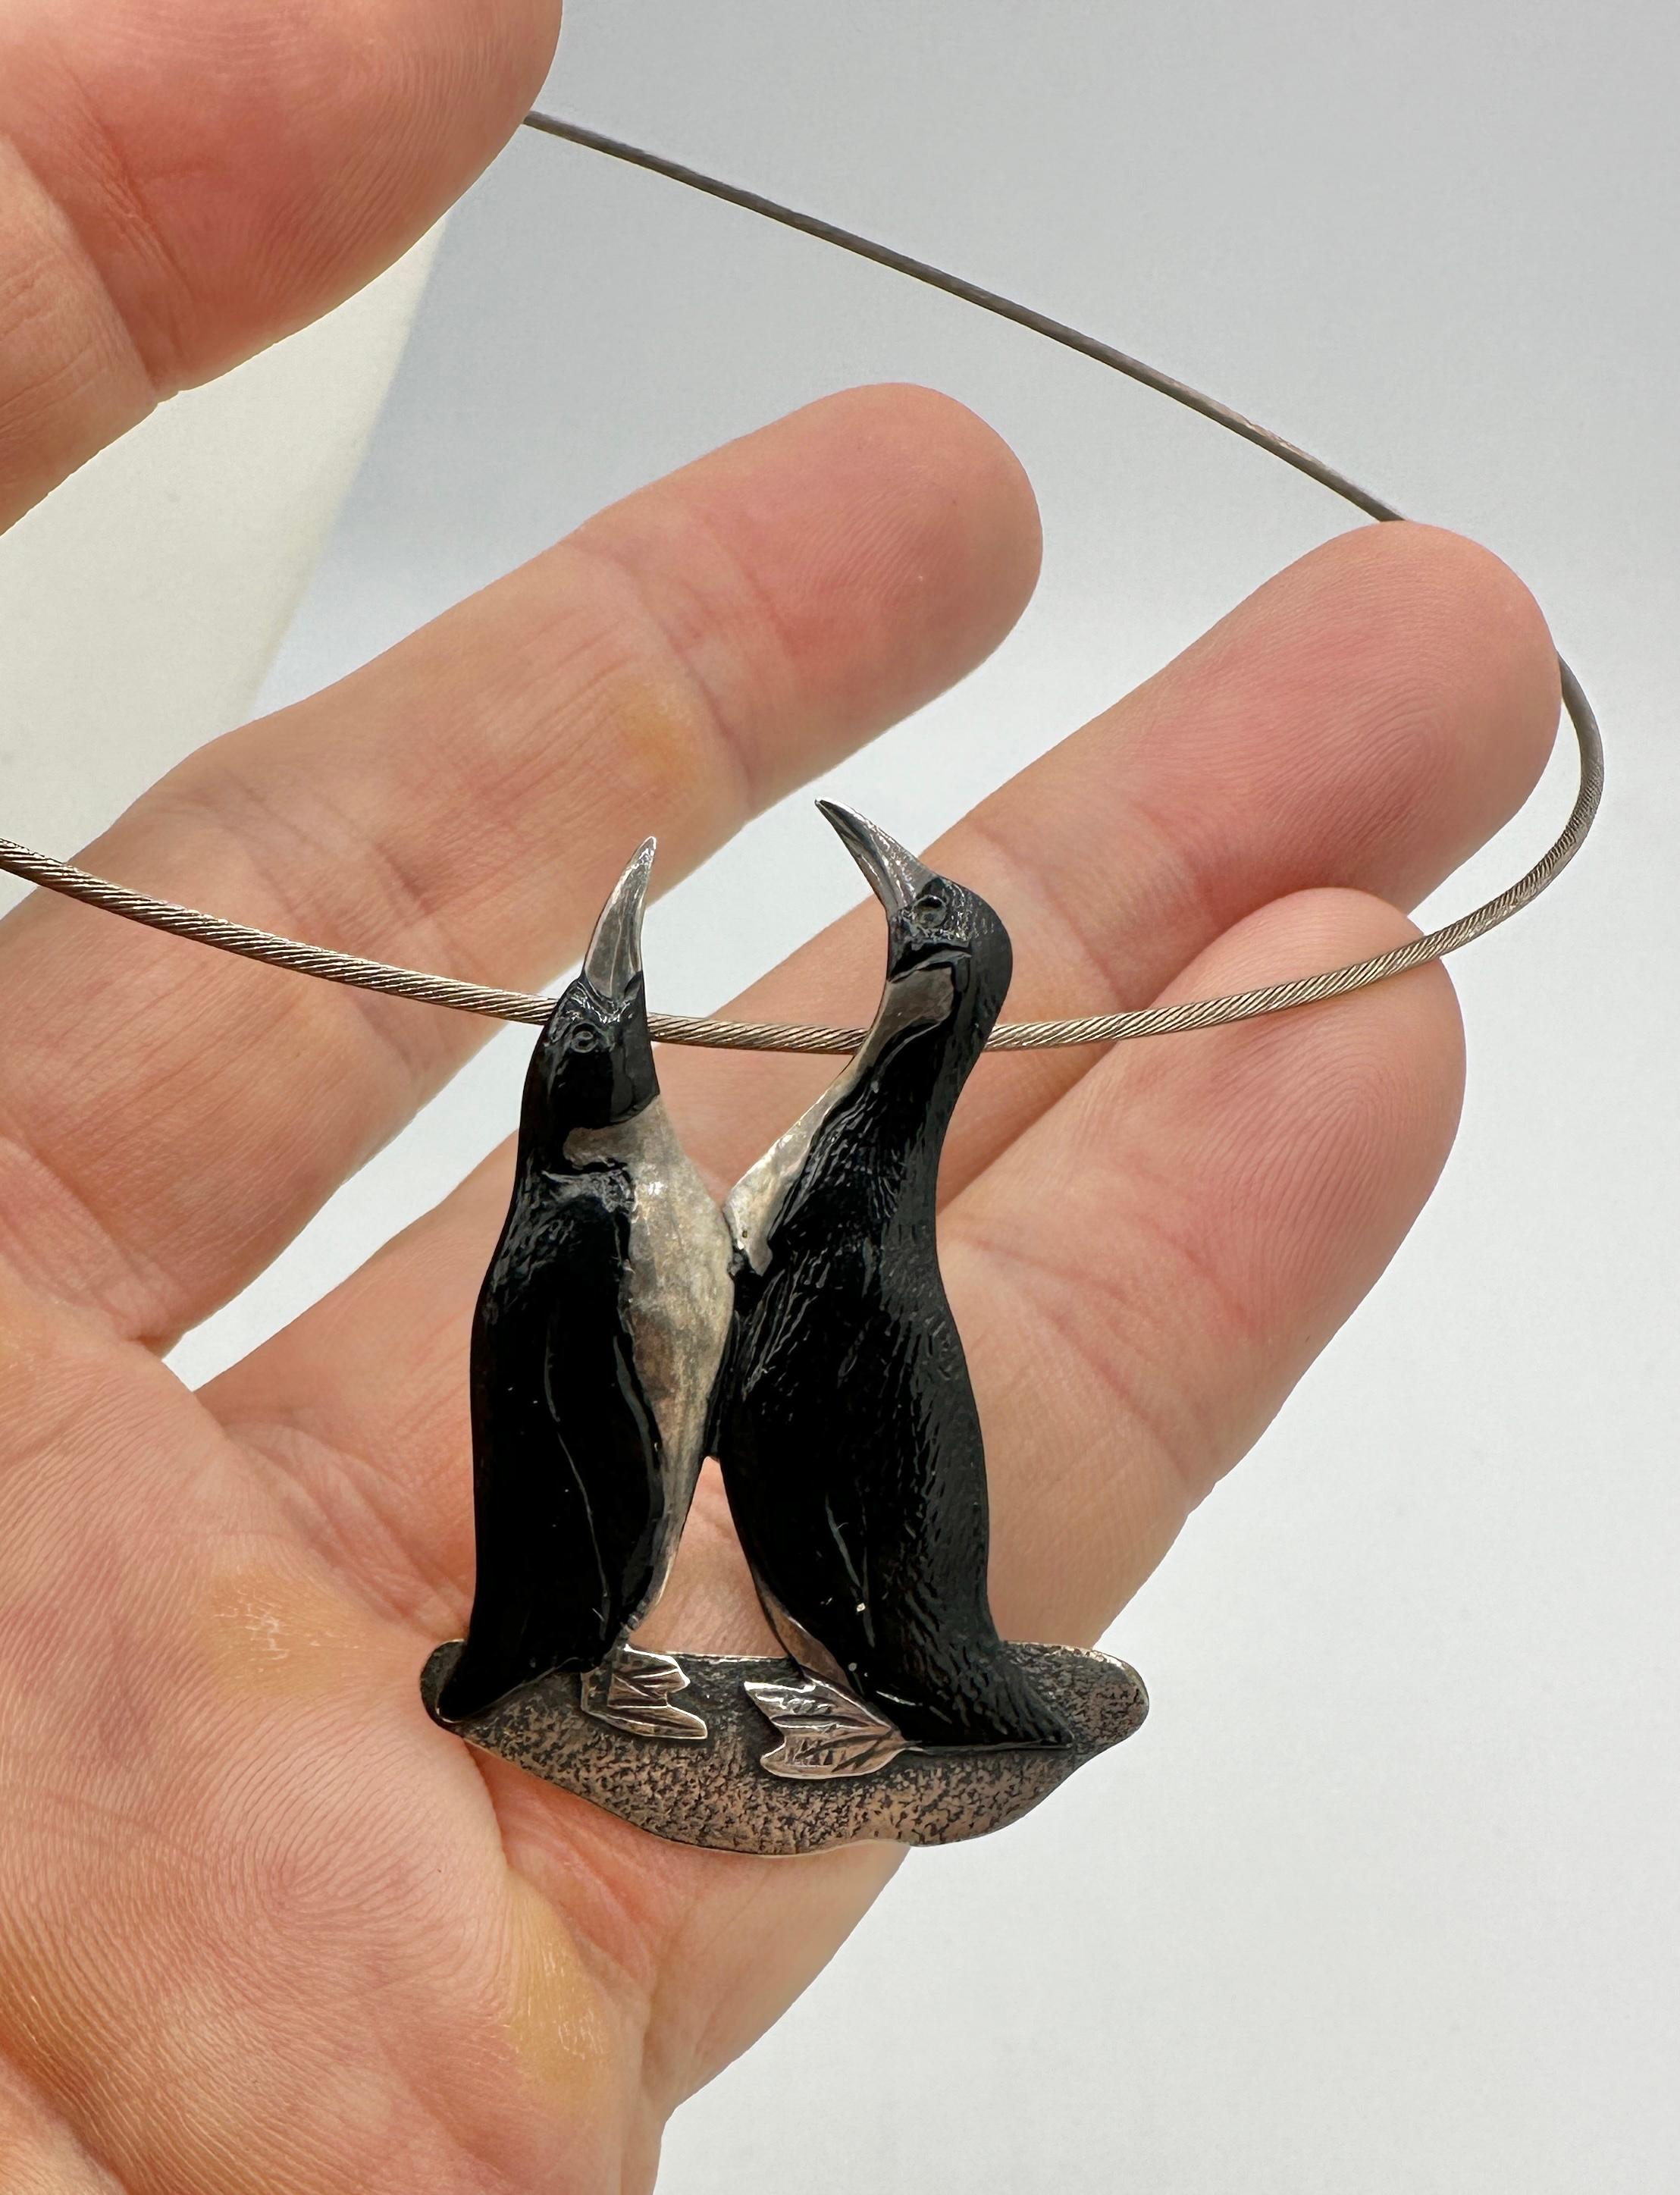 This is a stunning Penguin Necklace or Brooch with two Penguins in silver with gorgeous black enamel adornment.   The Mid-Century Modernist Drop pendant in Silver hangs from a collar necklace.  The pendant may also be removed to be worn as a brooch